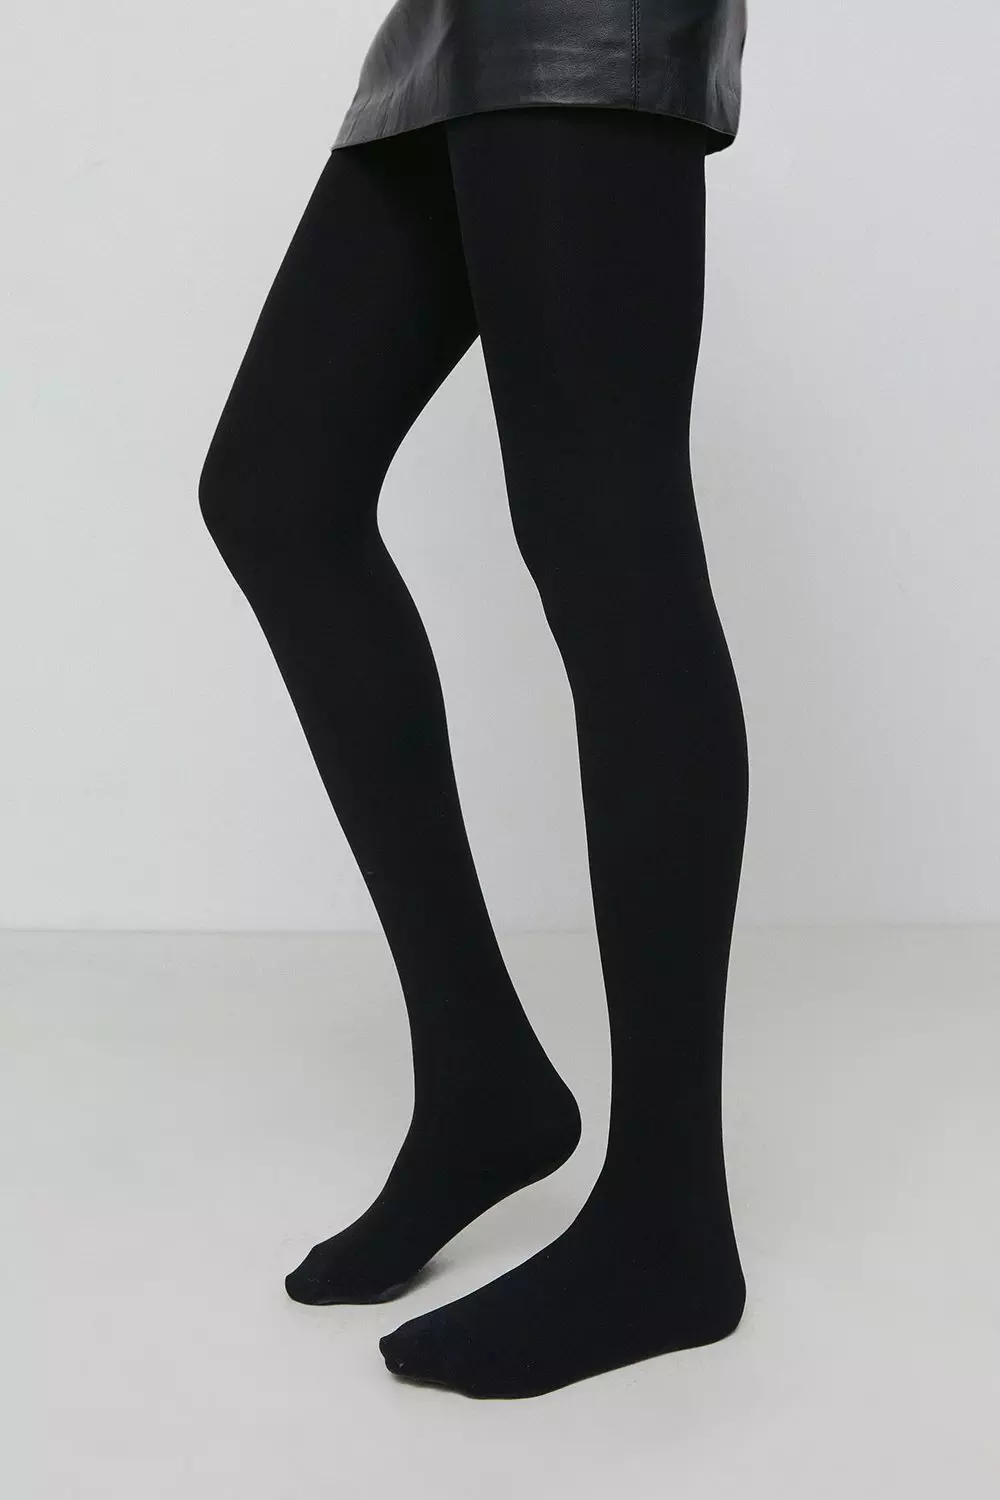 200 Denier Thermal Fleece Lined Tights M&S US, 46% OFF